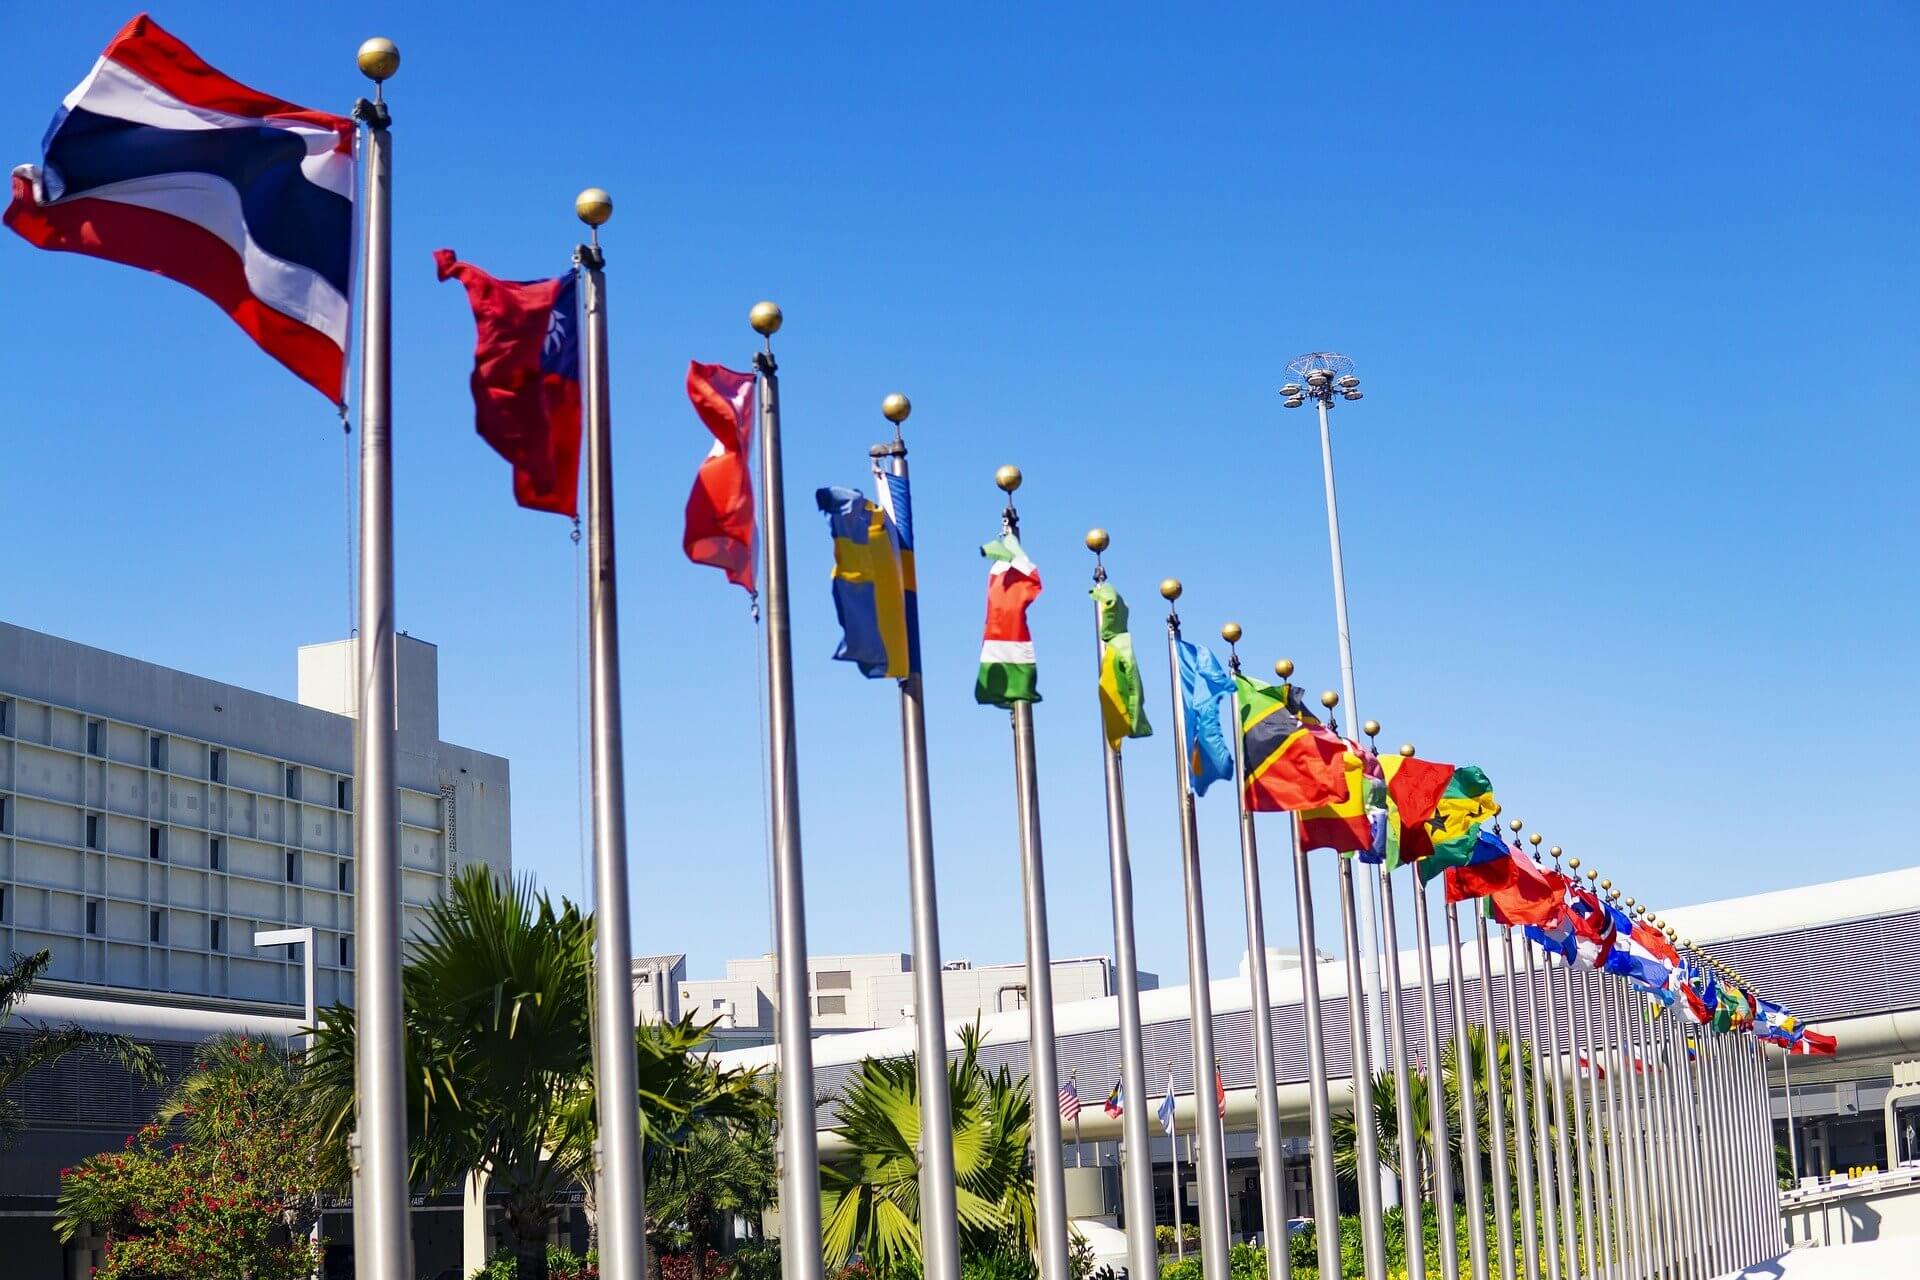 flags from various nations raised in a straight line